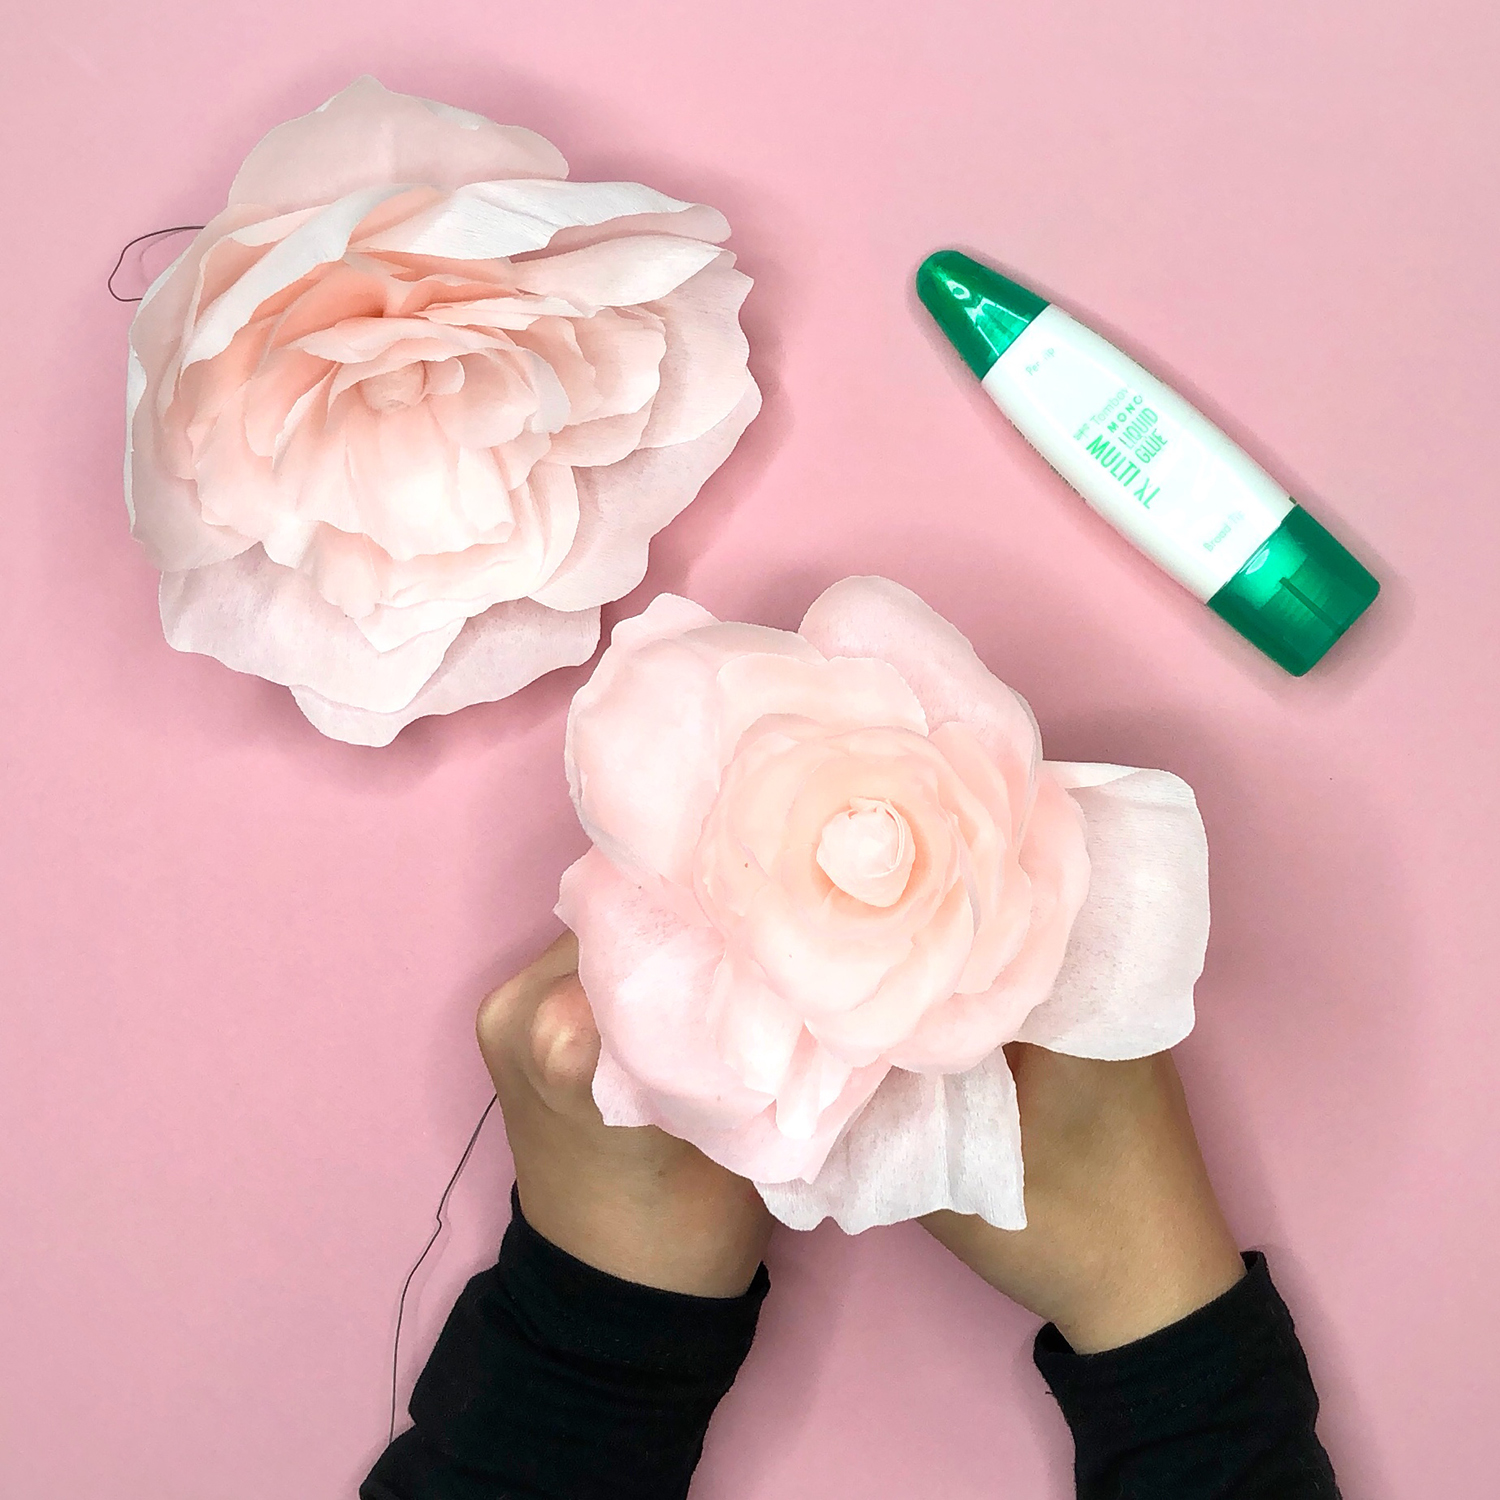 How to Make Easy Paper Flowers by Jessica Mack of BrownPaperBunny on behalf of Tombow